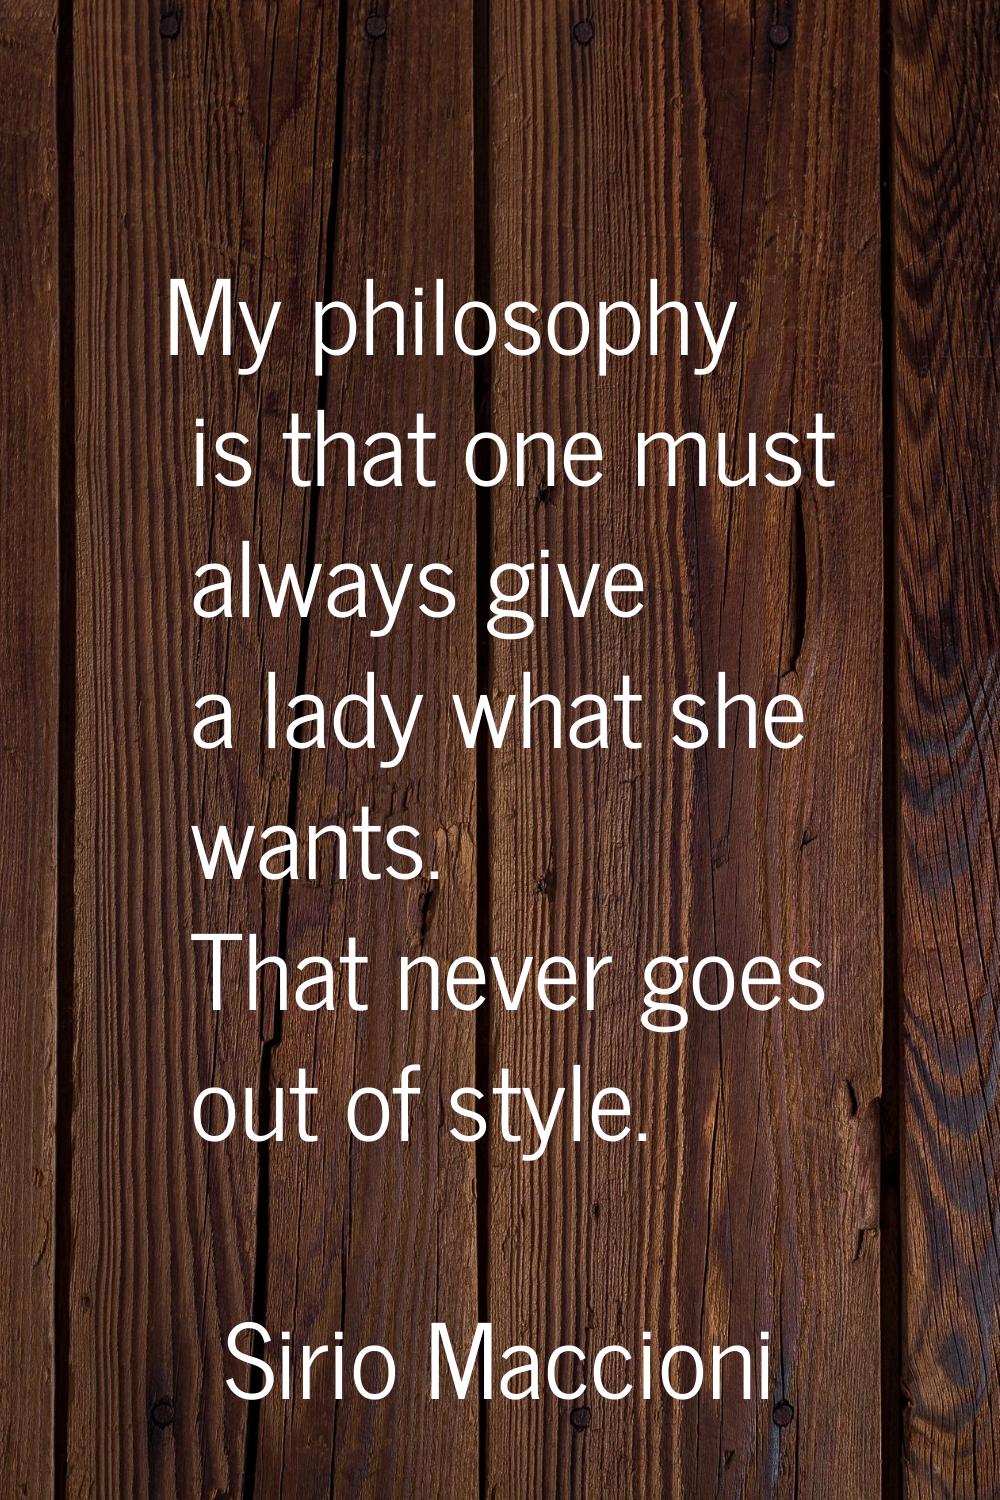 My philosophy is that one must always give a lady what she wants. That never goes out of style.